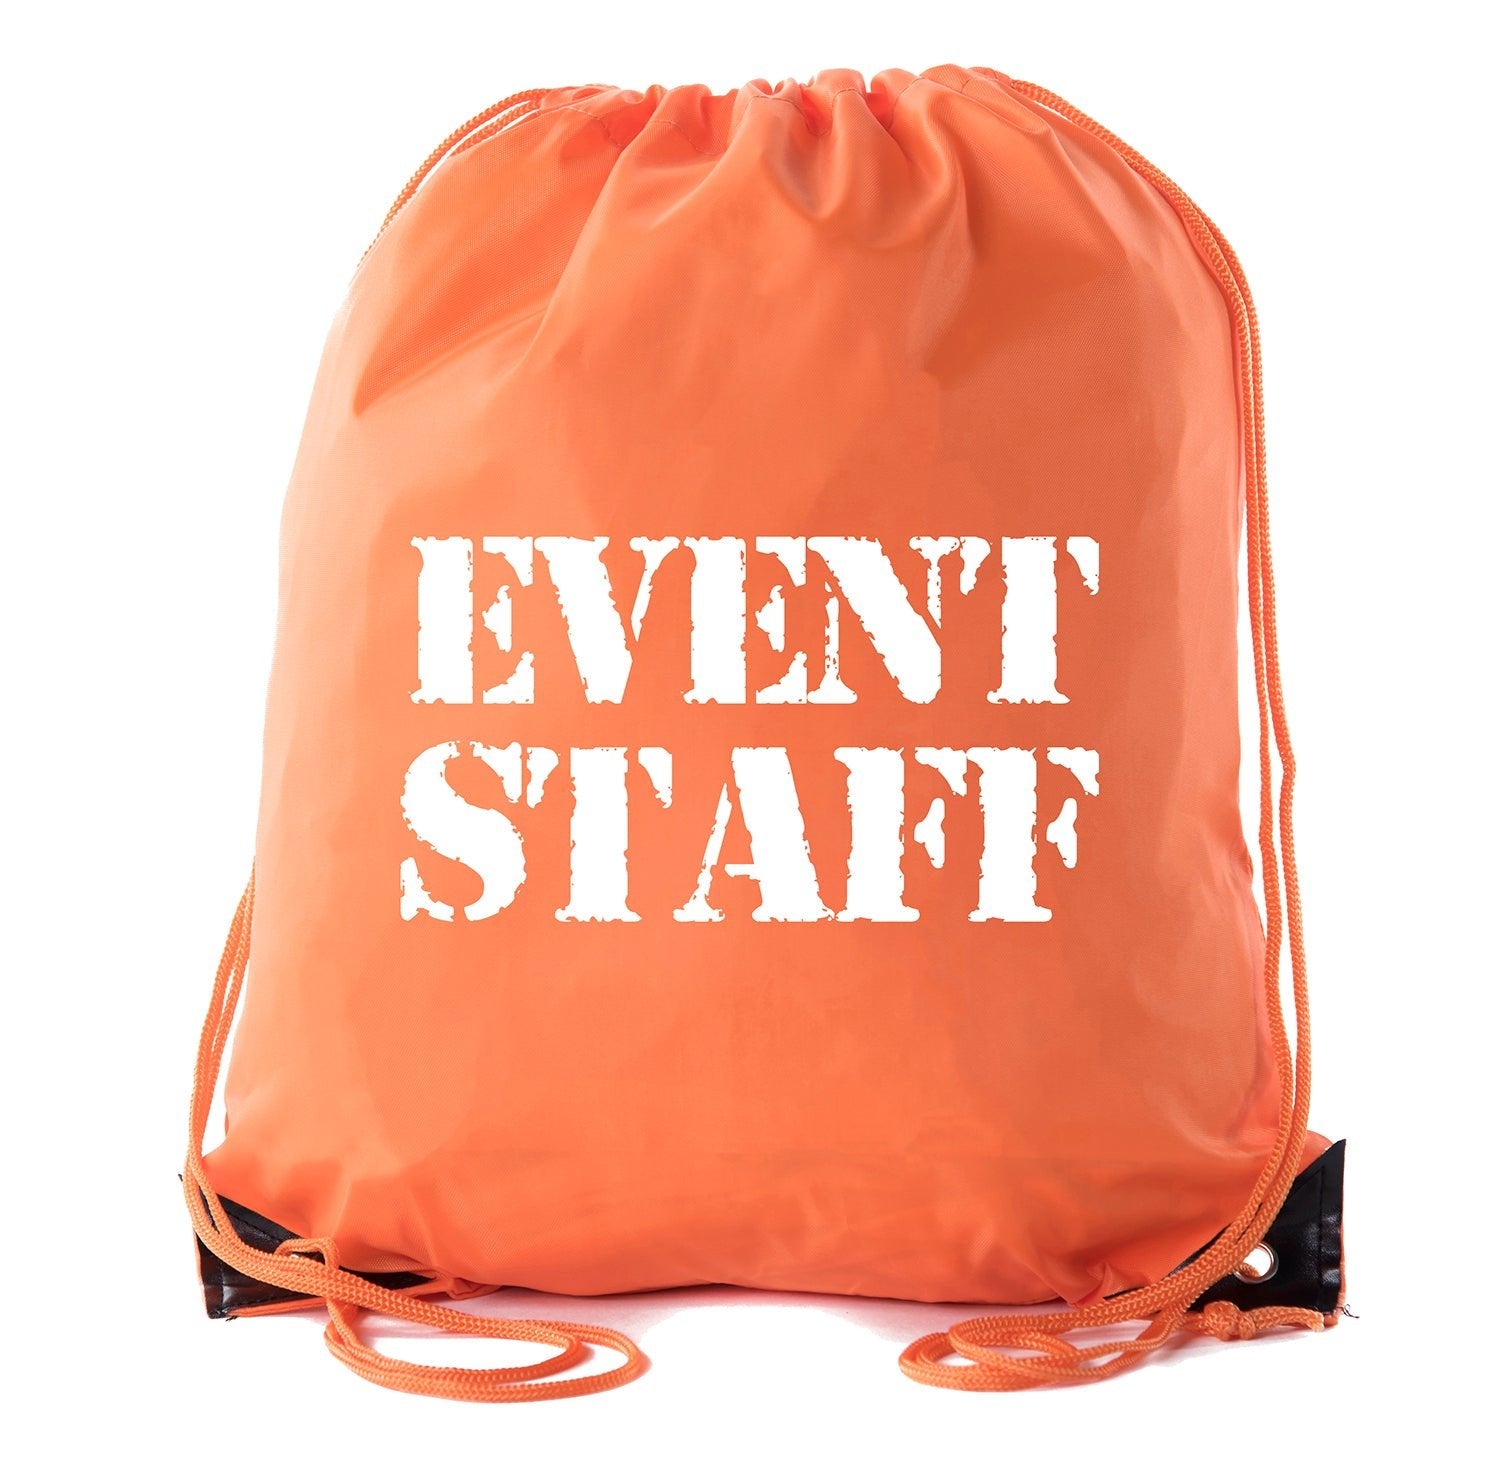 Event Staff - Rough Text - Polyester Drawstring Bag - Mato & Hash